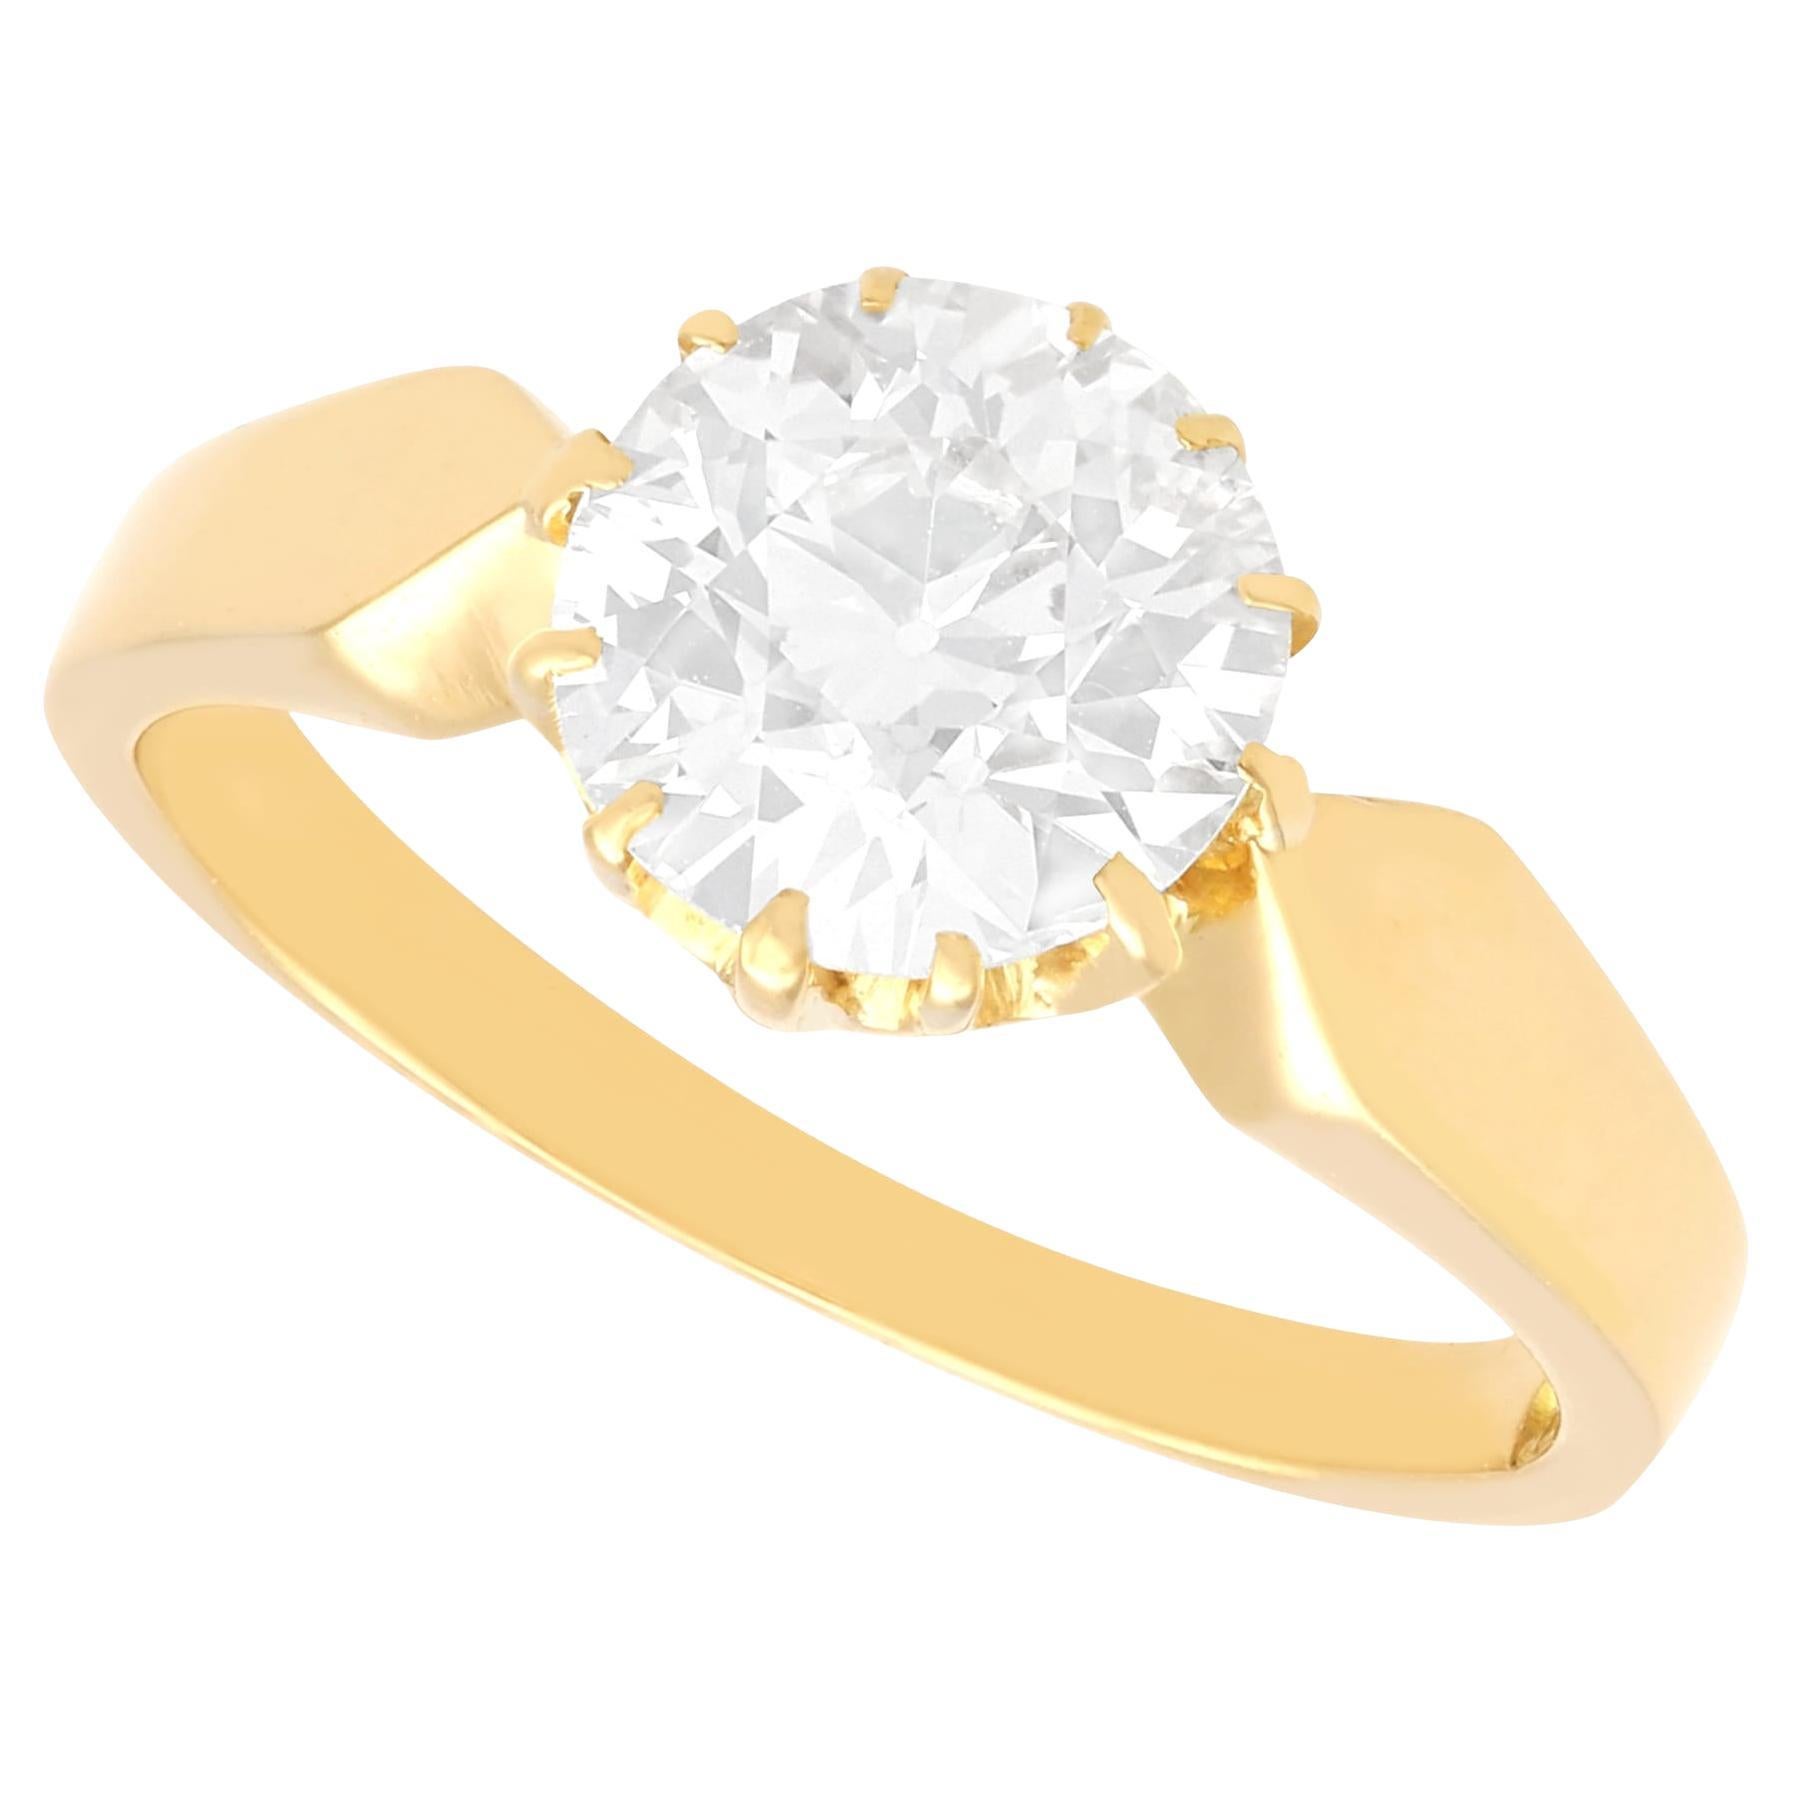 Edwardian 2.16 carat Diamond and 18k Yellow Gold Solitaire Ring For Sale